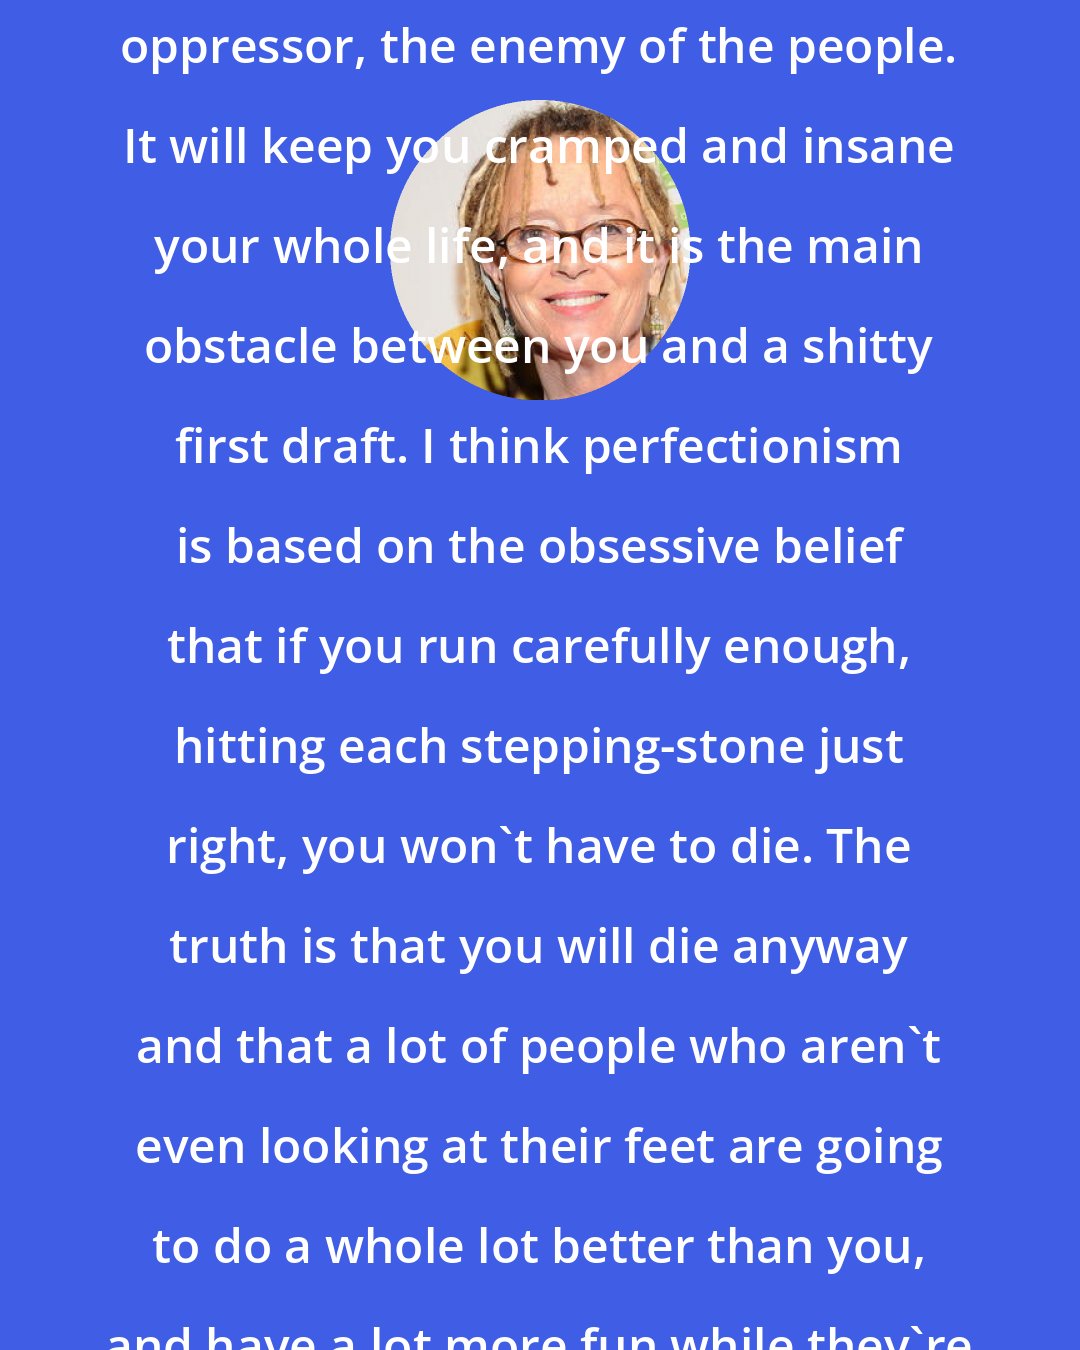 Anne Lamott: Perfectionism is the voice of the oppressor, the enemy of the people. It will keep you cramped and insane your whole life, and it is the main obstacle between you and a shitty first draft. I think perfectionism is based on the obsessive belief that if you run carefully enough, hitting each stepping-stone just right, you won't have to die. The truth is that you will die anyway and that a lot of people who aren't even looking at their feet are going to do a whole lot better than you, and have a lot more fun while they're doing it.